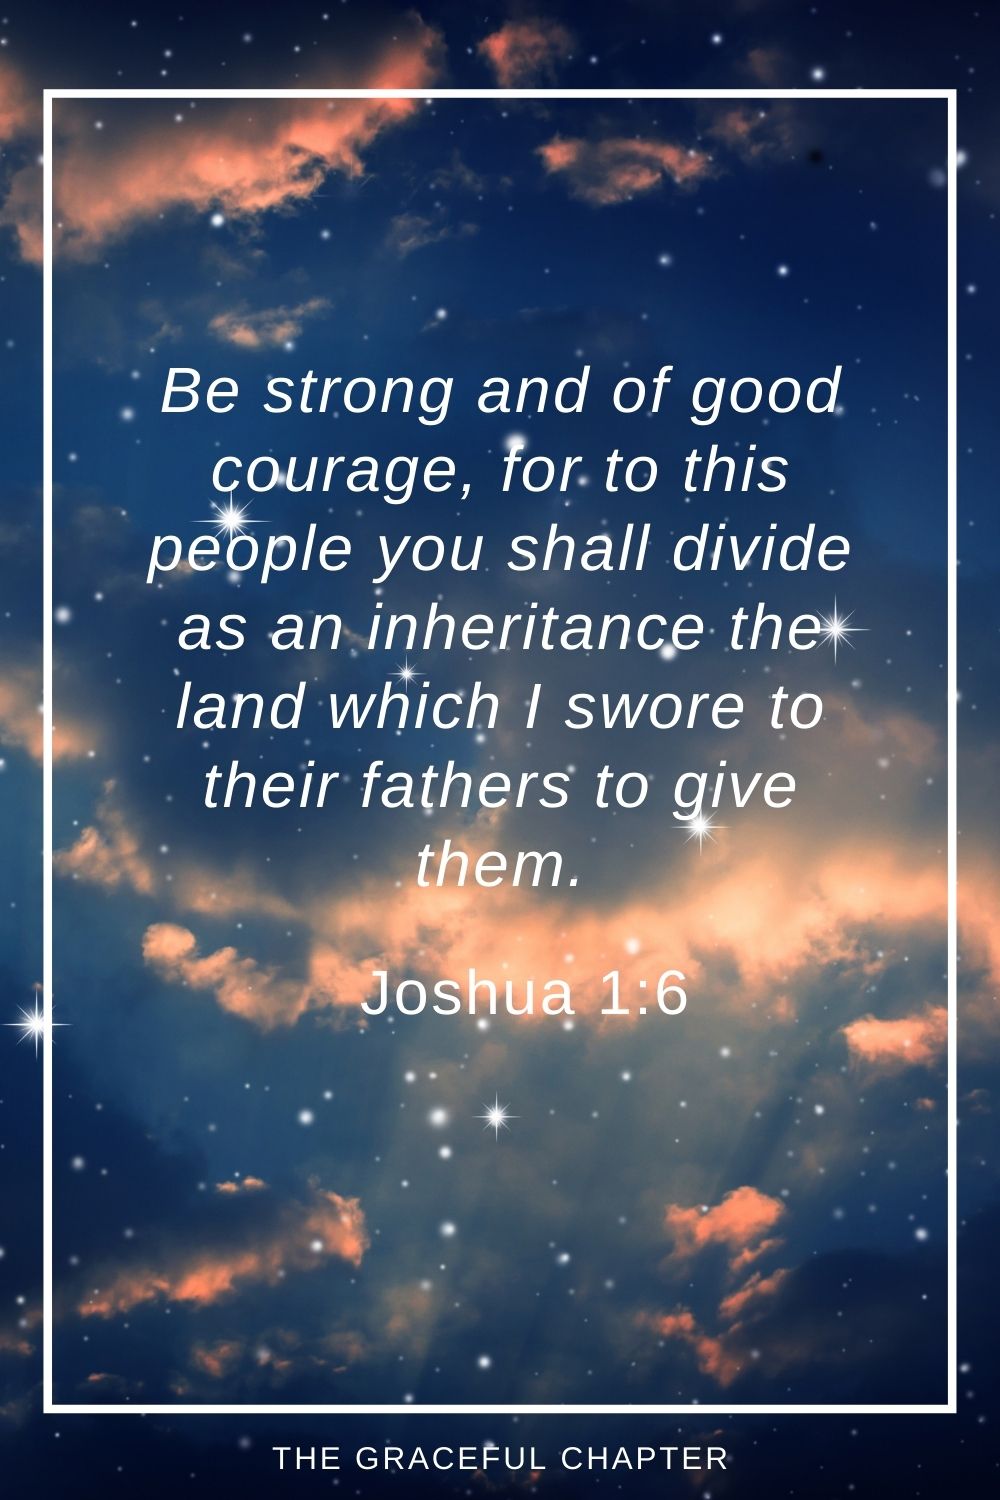 Be strong and of good courage, for to this people you shall divide as an inheritance the land which I swore to their fathers to give them. Joshua 1:6